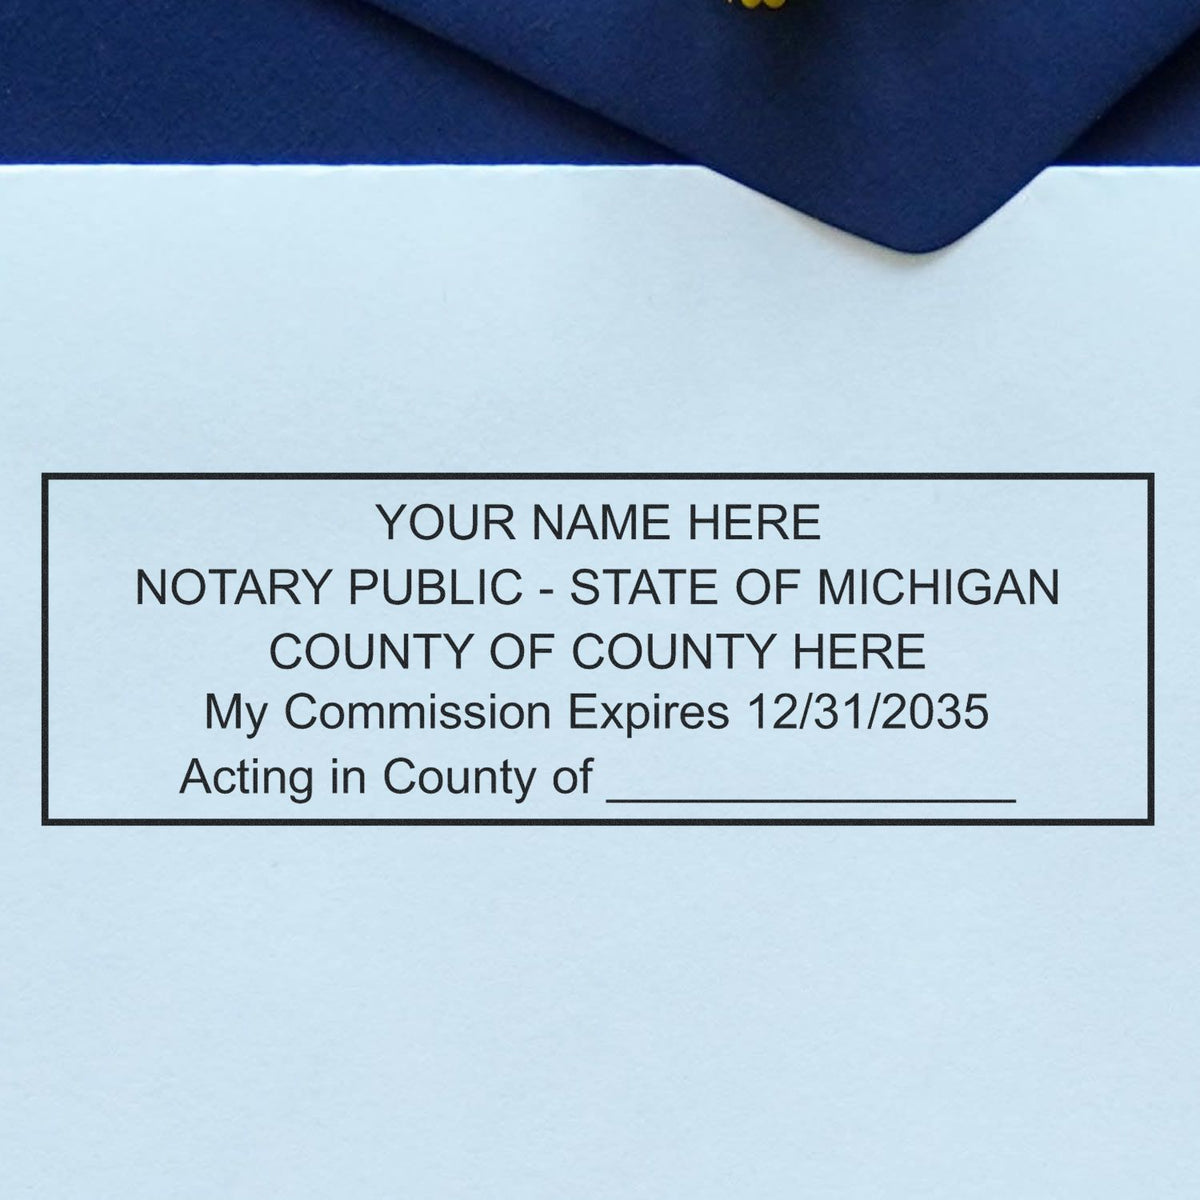 The Slim Pre-Inked State Seal Notary Stamp for Michigan stamp impression comes to life with a crisp, detailed photo on paper - showcasing true professional quality.